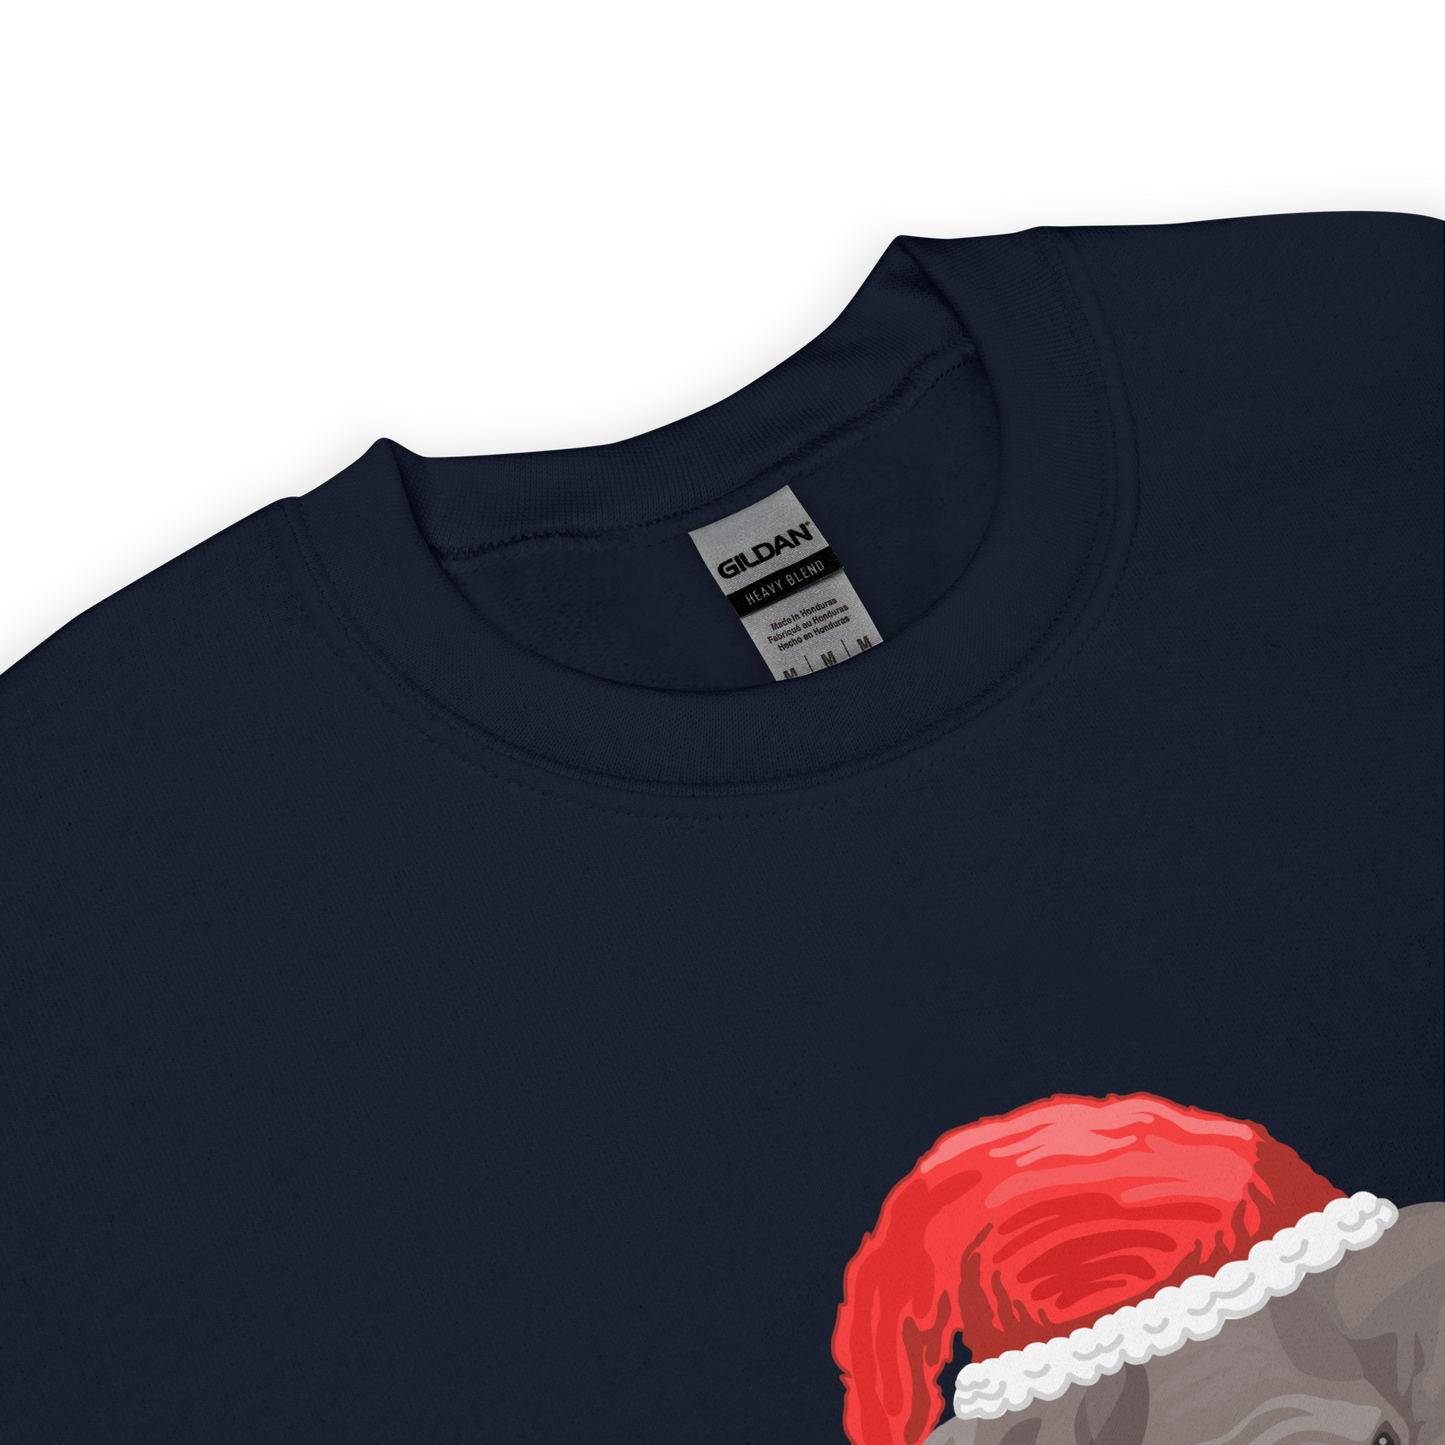 Product details of a Navy Christmas Elephant Sweatshirt featuring a delight Elephant Wearing an Elf Hat graphic on the chest - Funny Christmas Graphic Elephant Sweatshirts - Boozy Fox